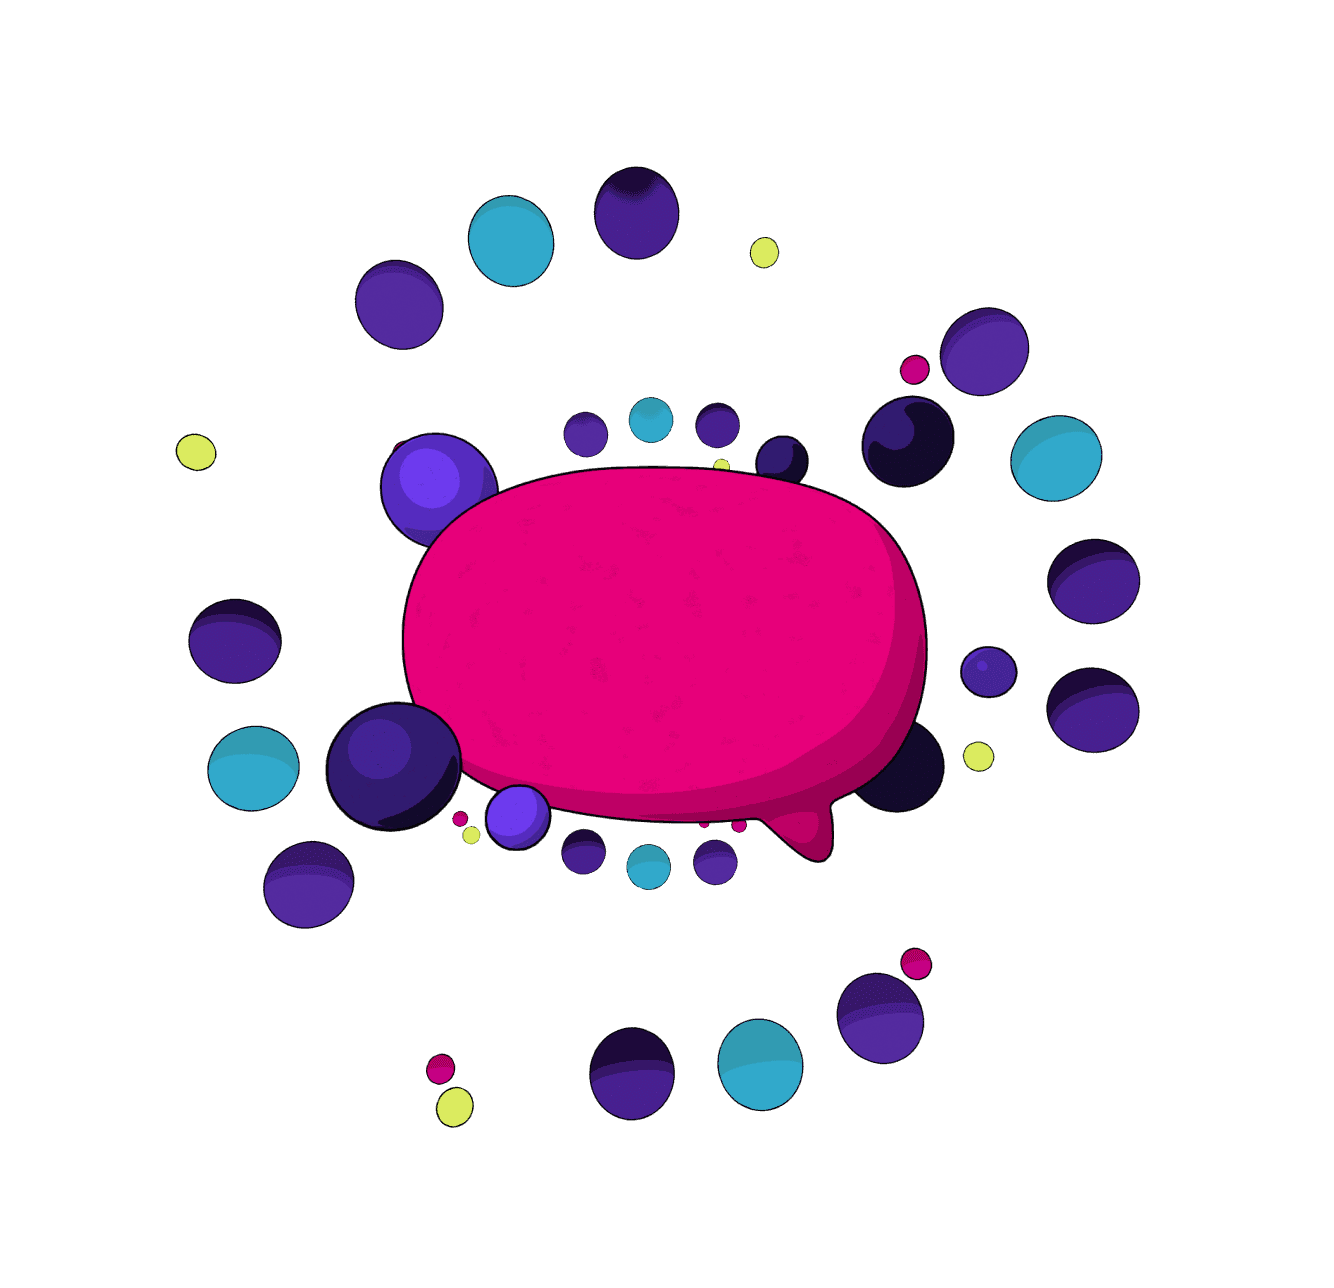 Polkadot pink speech bubble with graphic in a vector style